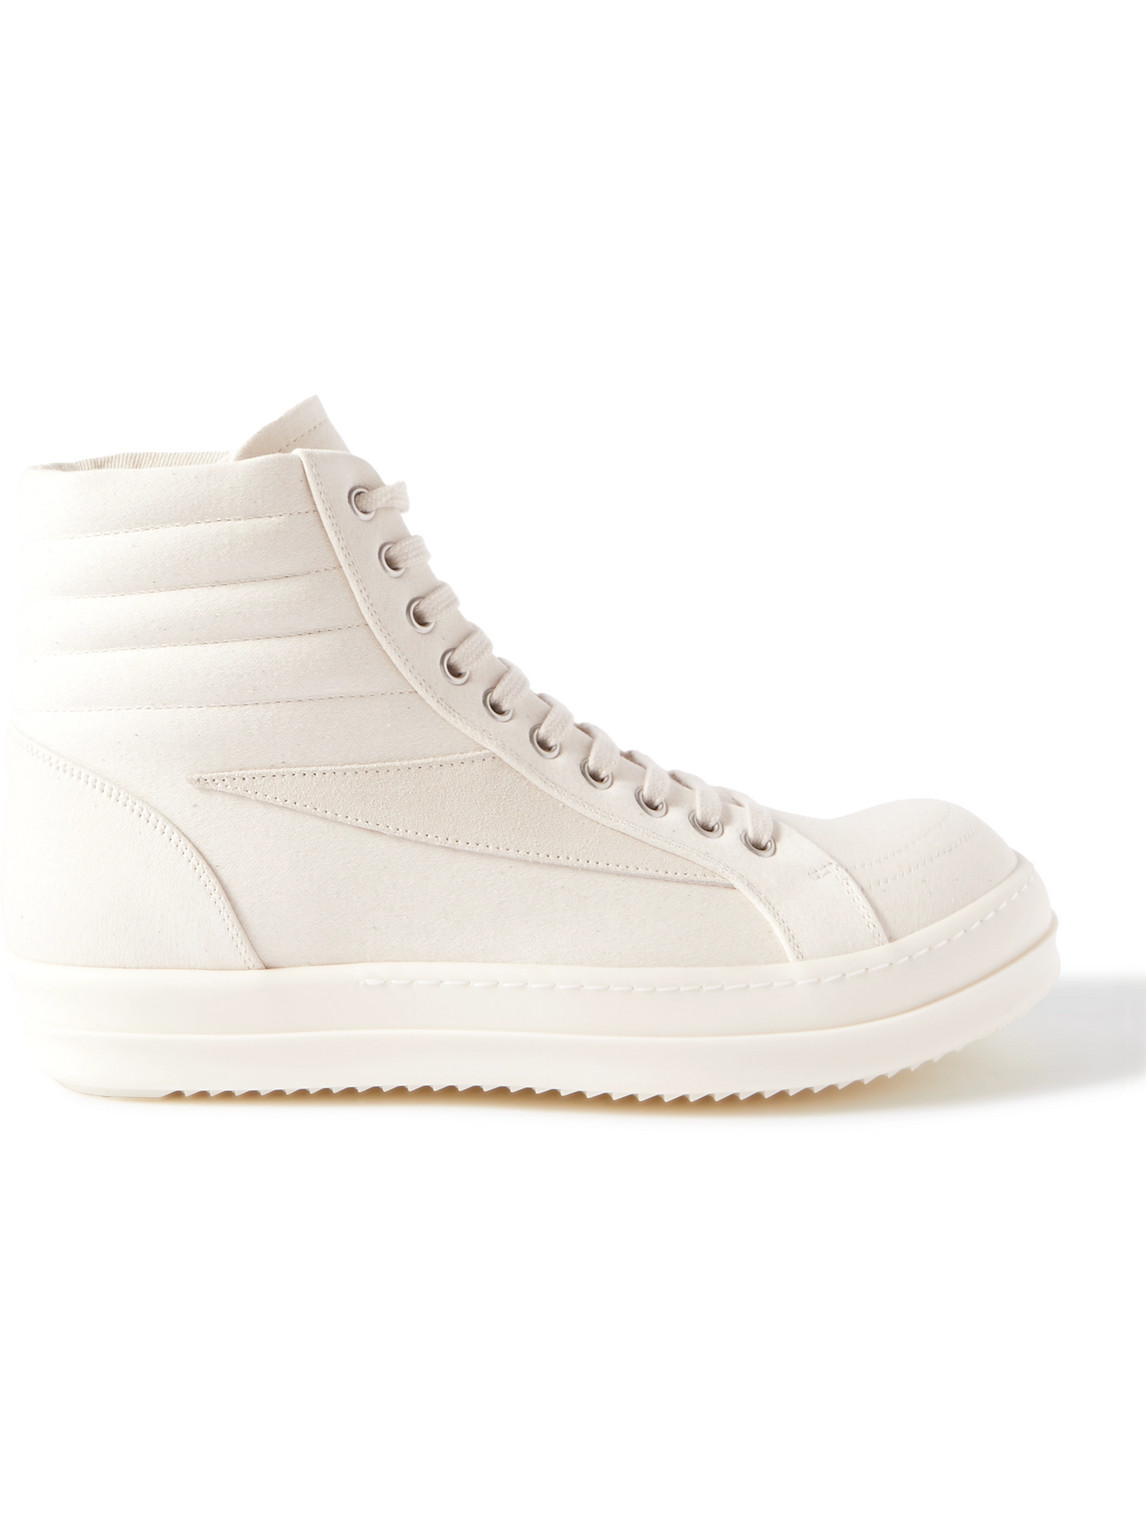 Vintage Suede-Trimmed Canvas High-Top Sneakers